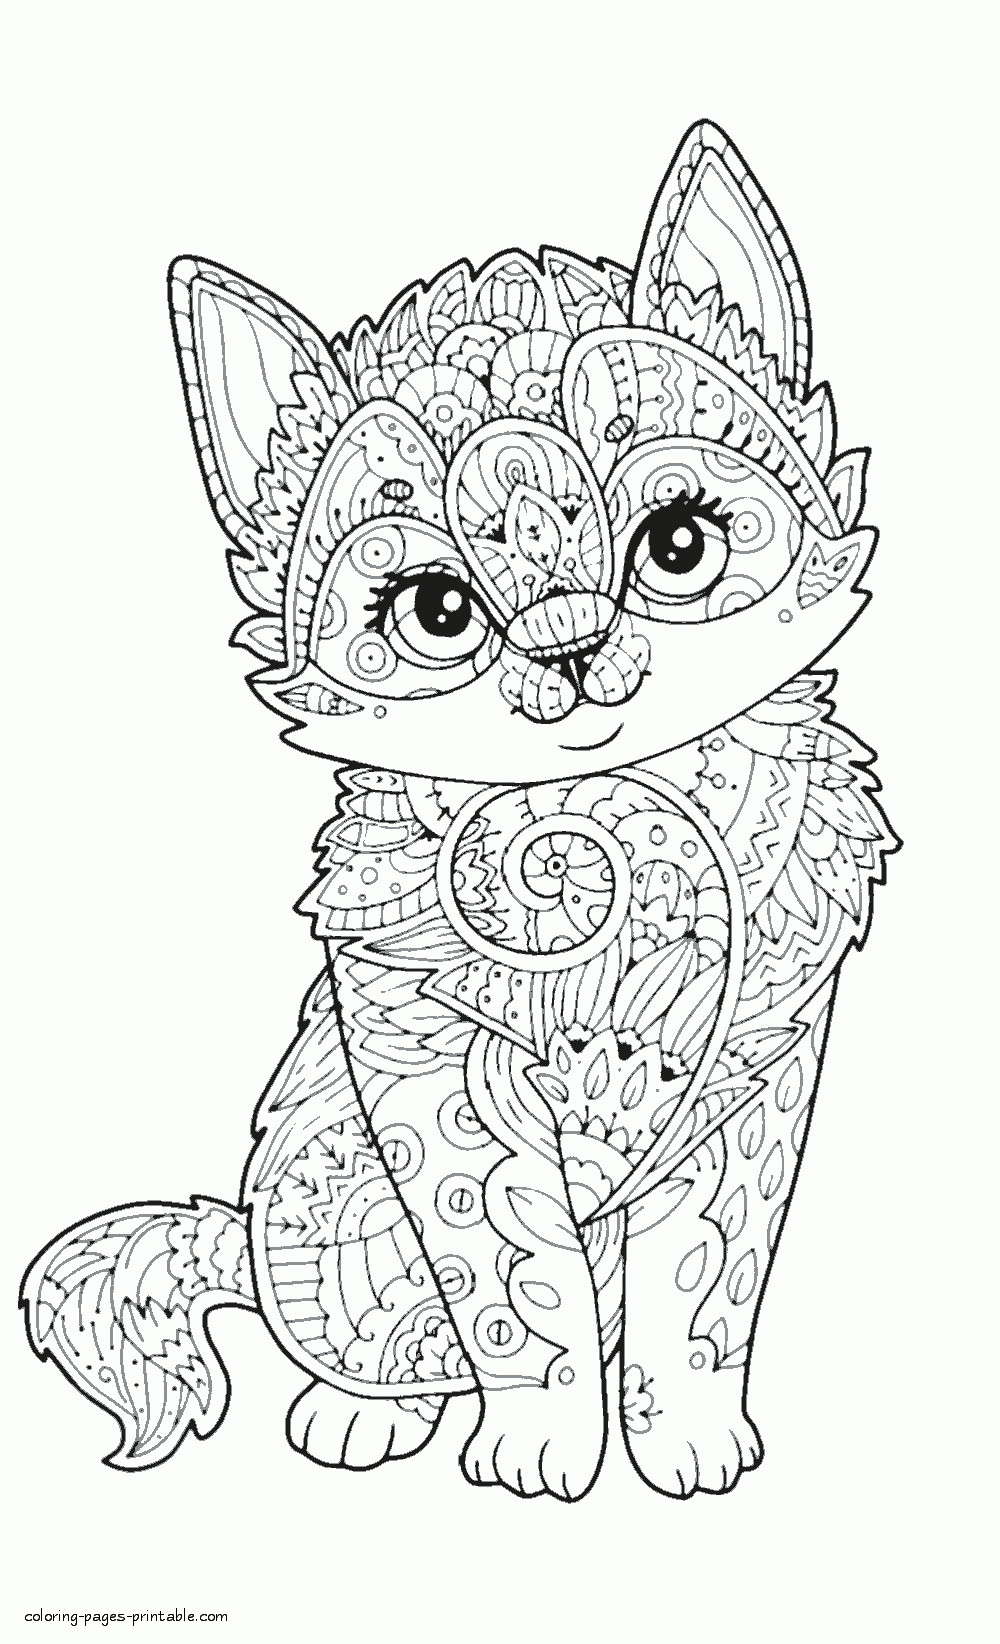 Cute Animal Coloring Pages For Adults
 Cute Animal Coloring Pages For Adults Awesome Sloth In